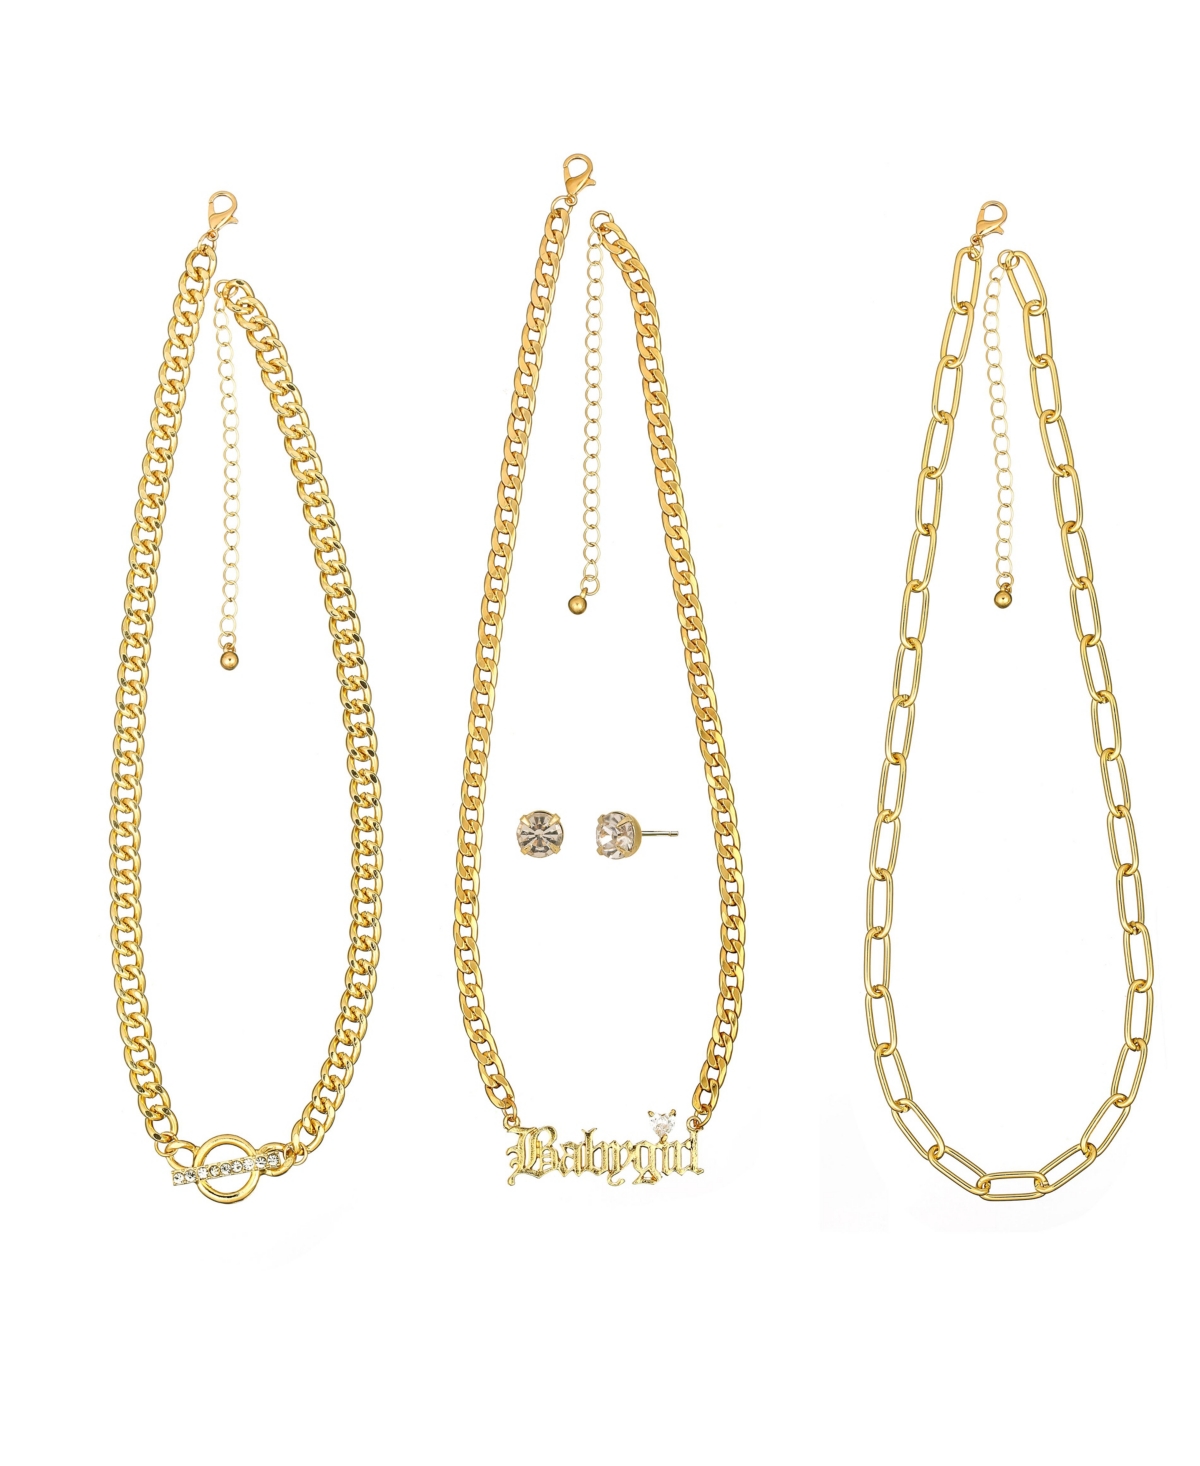 3Pc Babygirl Necklace And Earring Set - Gold